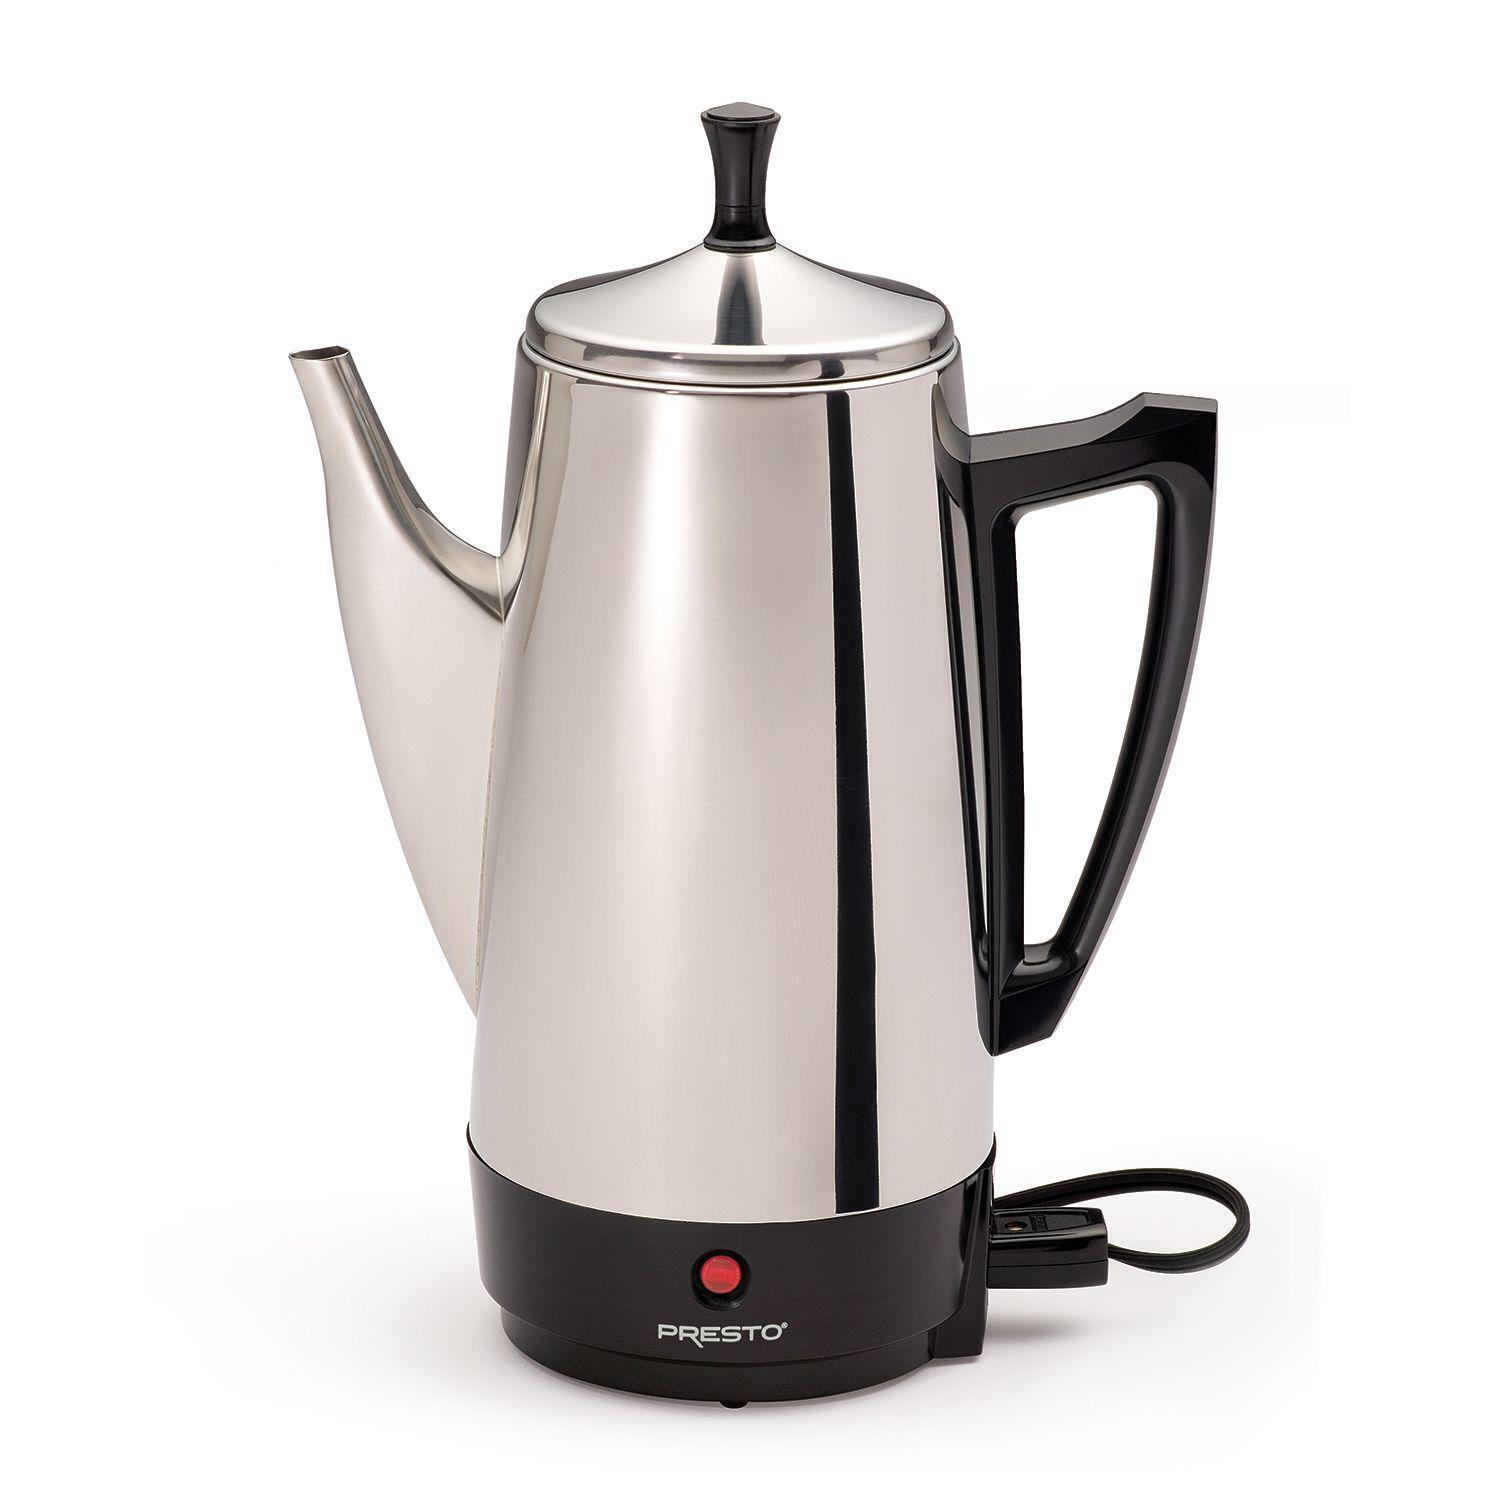 Presto 12-Cup Stainless Steel Electric Percolator. |925